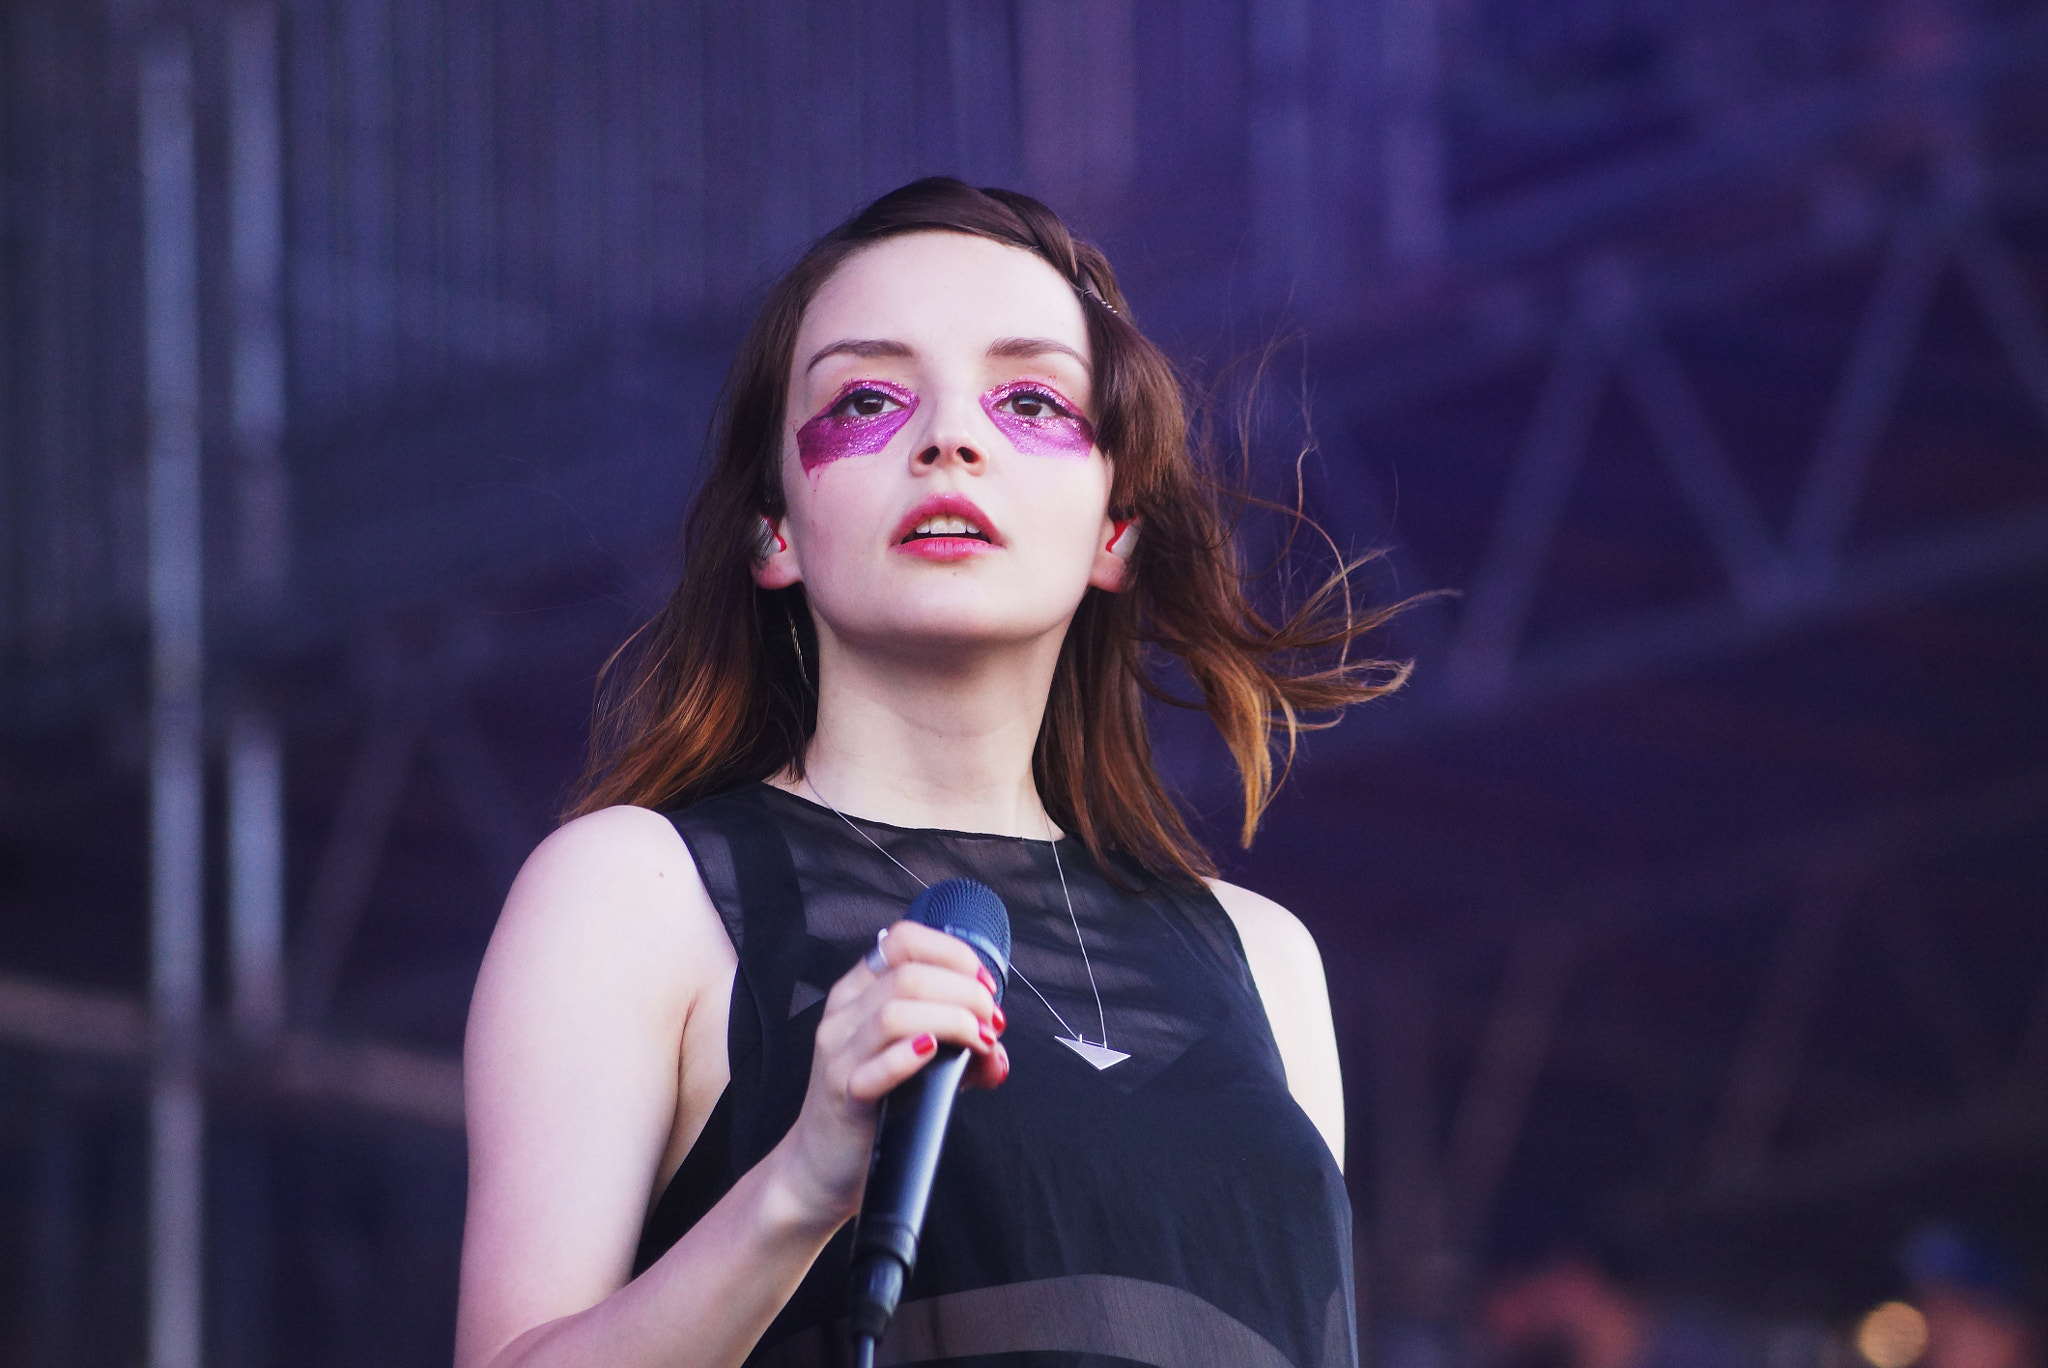 People 2048x1368 concerts Lauren Mayberry Chvrches singer musician pale women